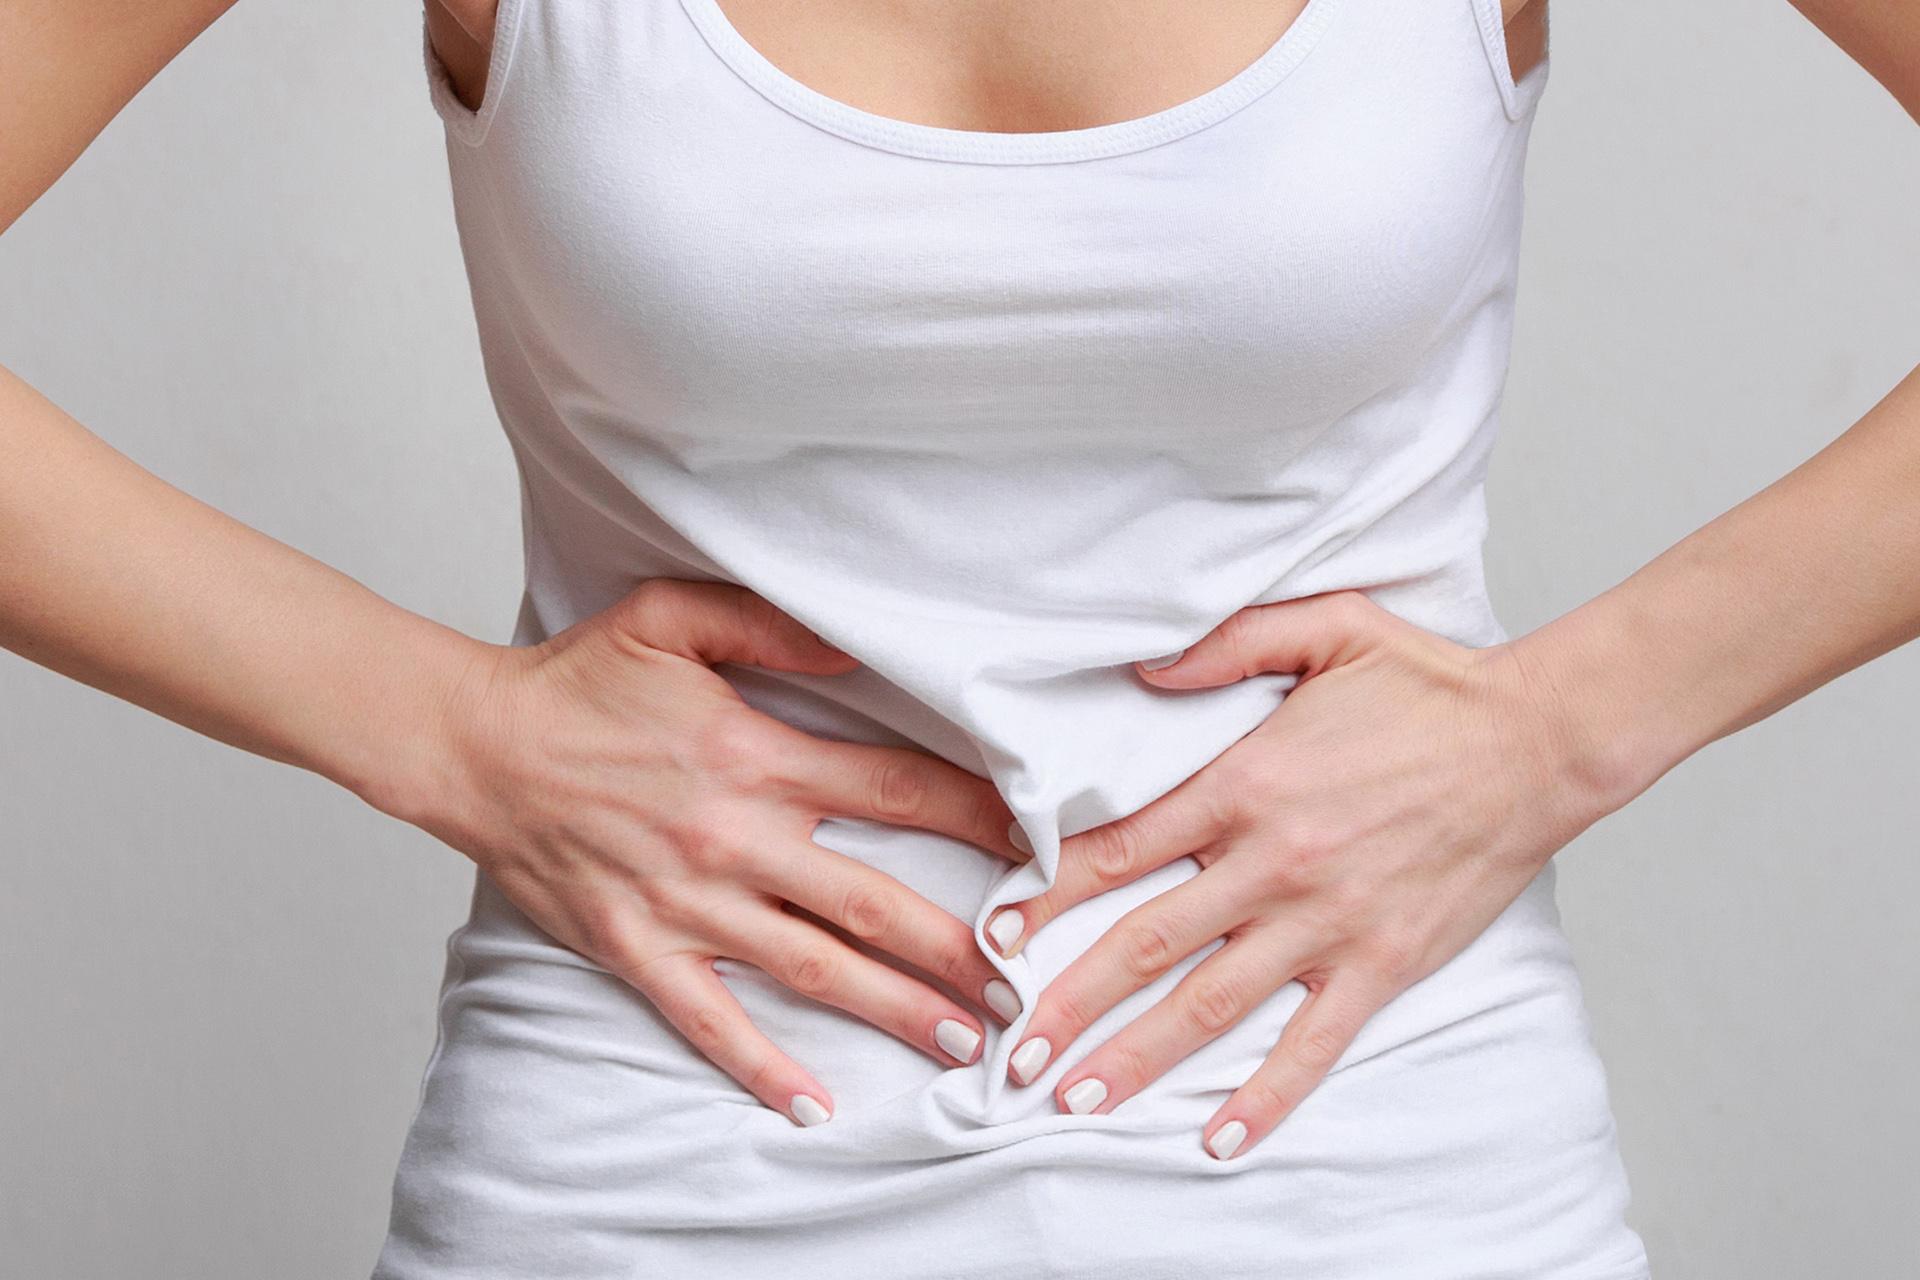 Digestive Enzymes: 6 Amazing Benefits You Did Not Know!